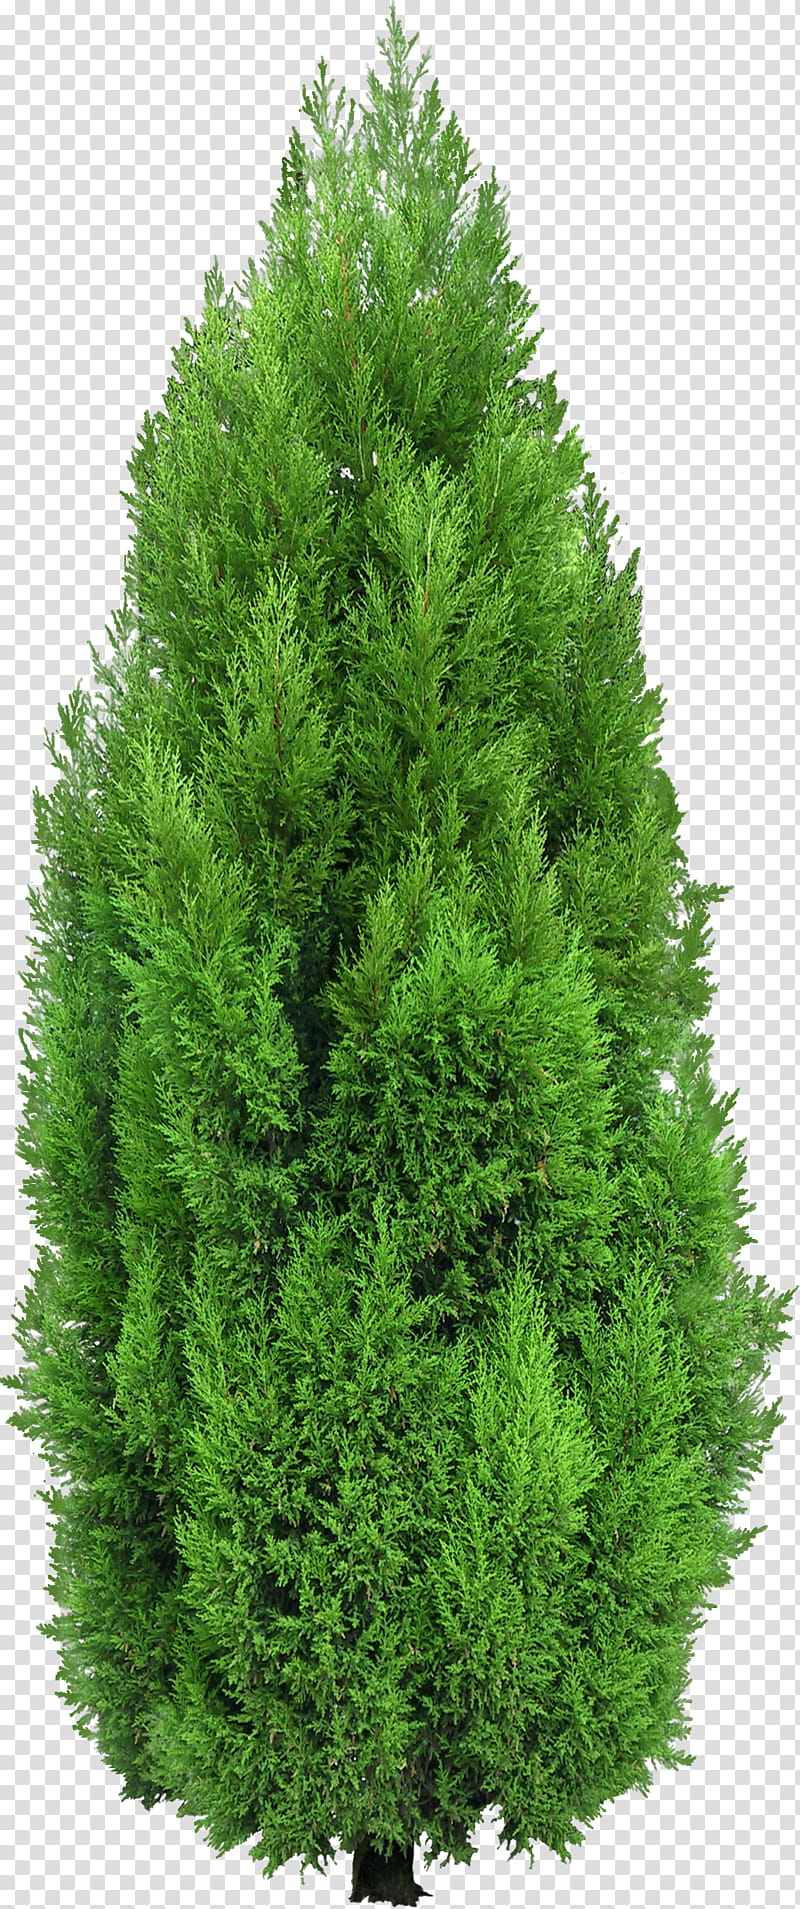 Family Tree, Mediterranean Cypress, Spruce, Bald Cypress, Evergreen, Pine, Landscape Architecture, Hedge transparent background PNG clipart